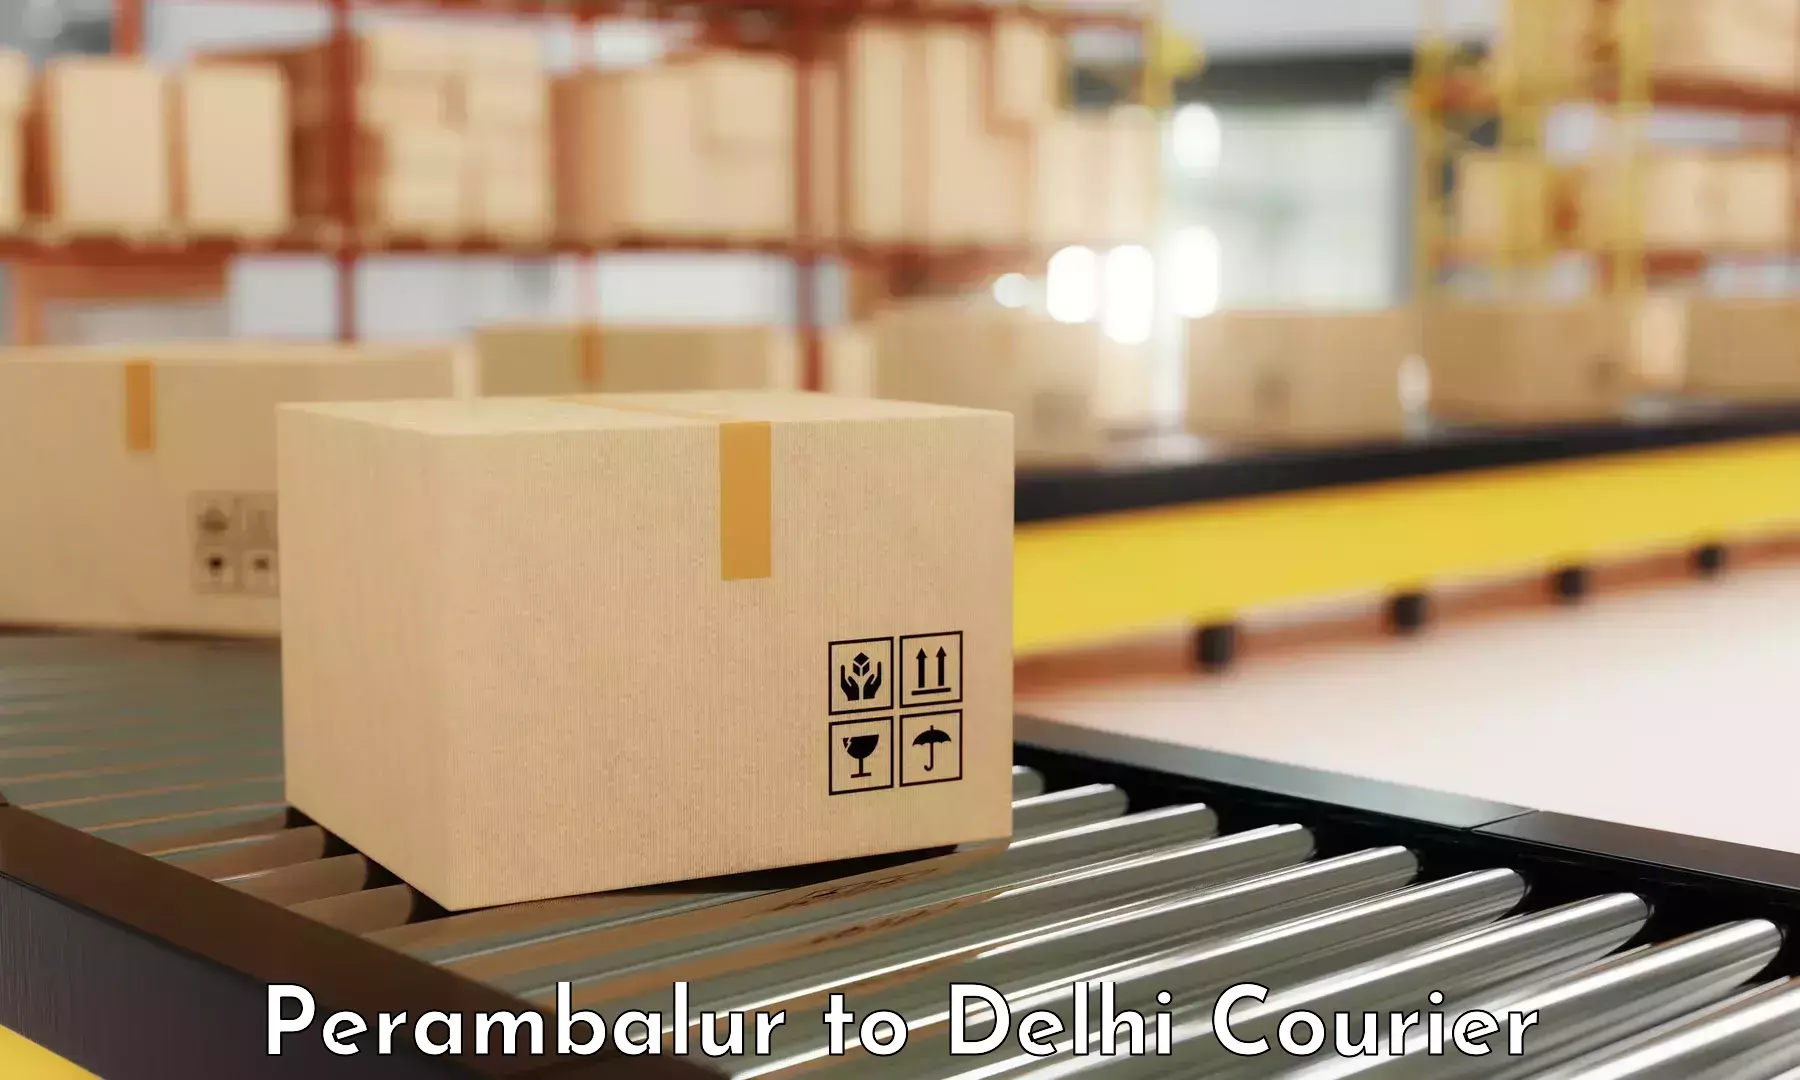 Reliable package handling Perambalur to NCR